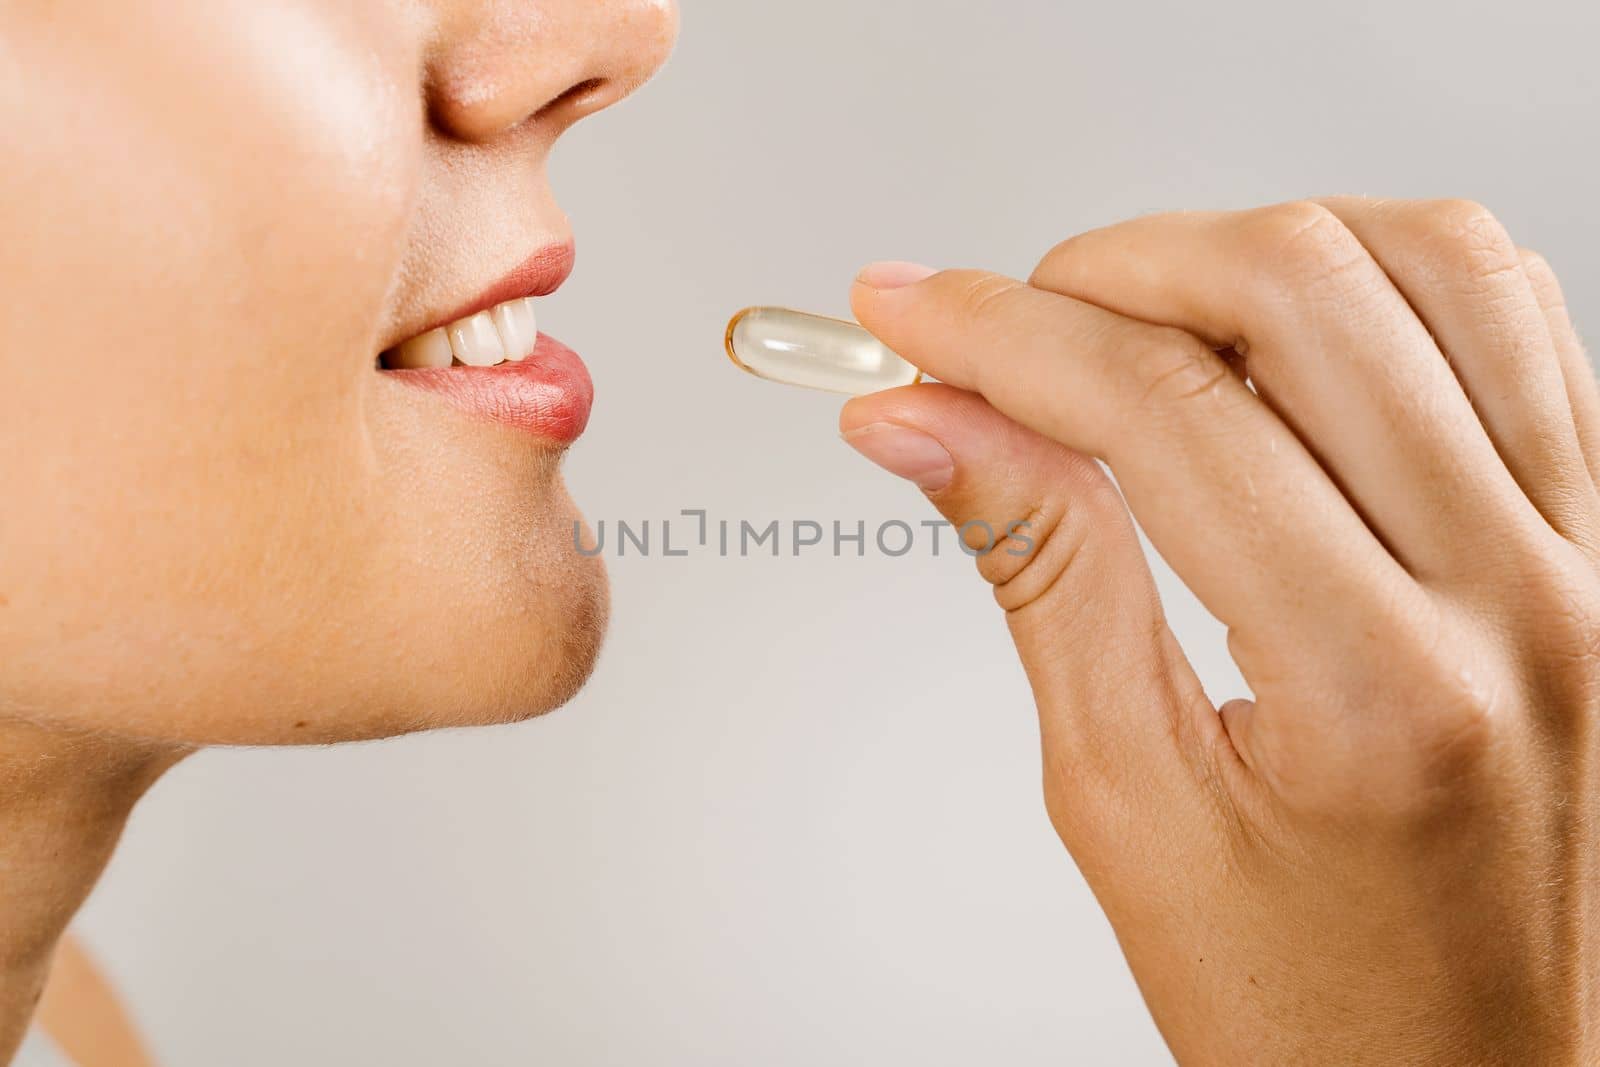 Omega 3 pill of fish fat oil near lips close-up. BADS capsule of biologically active dietary supplements. Vitamin D for building and maintaining healthy bones